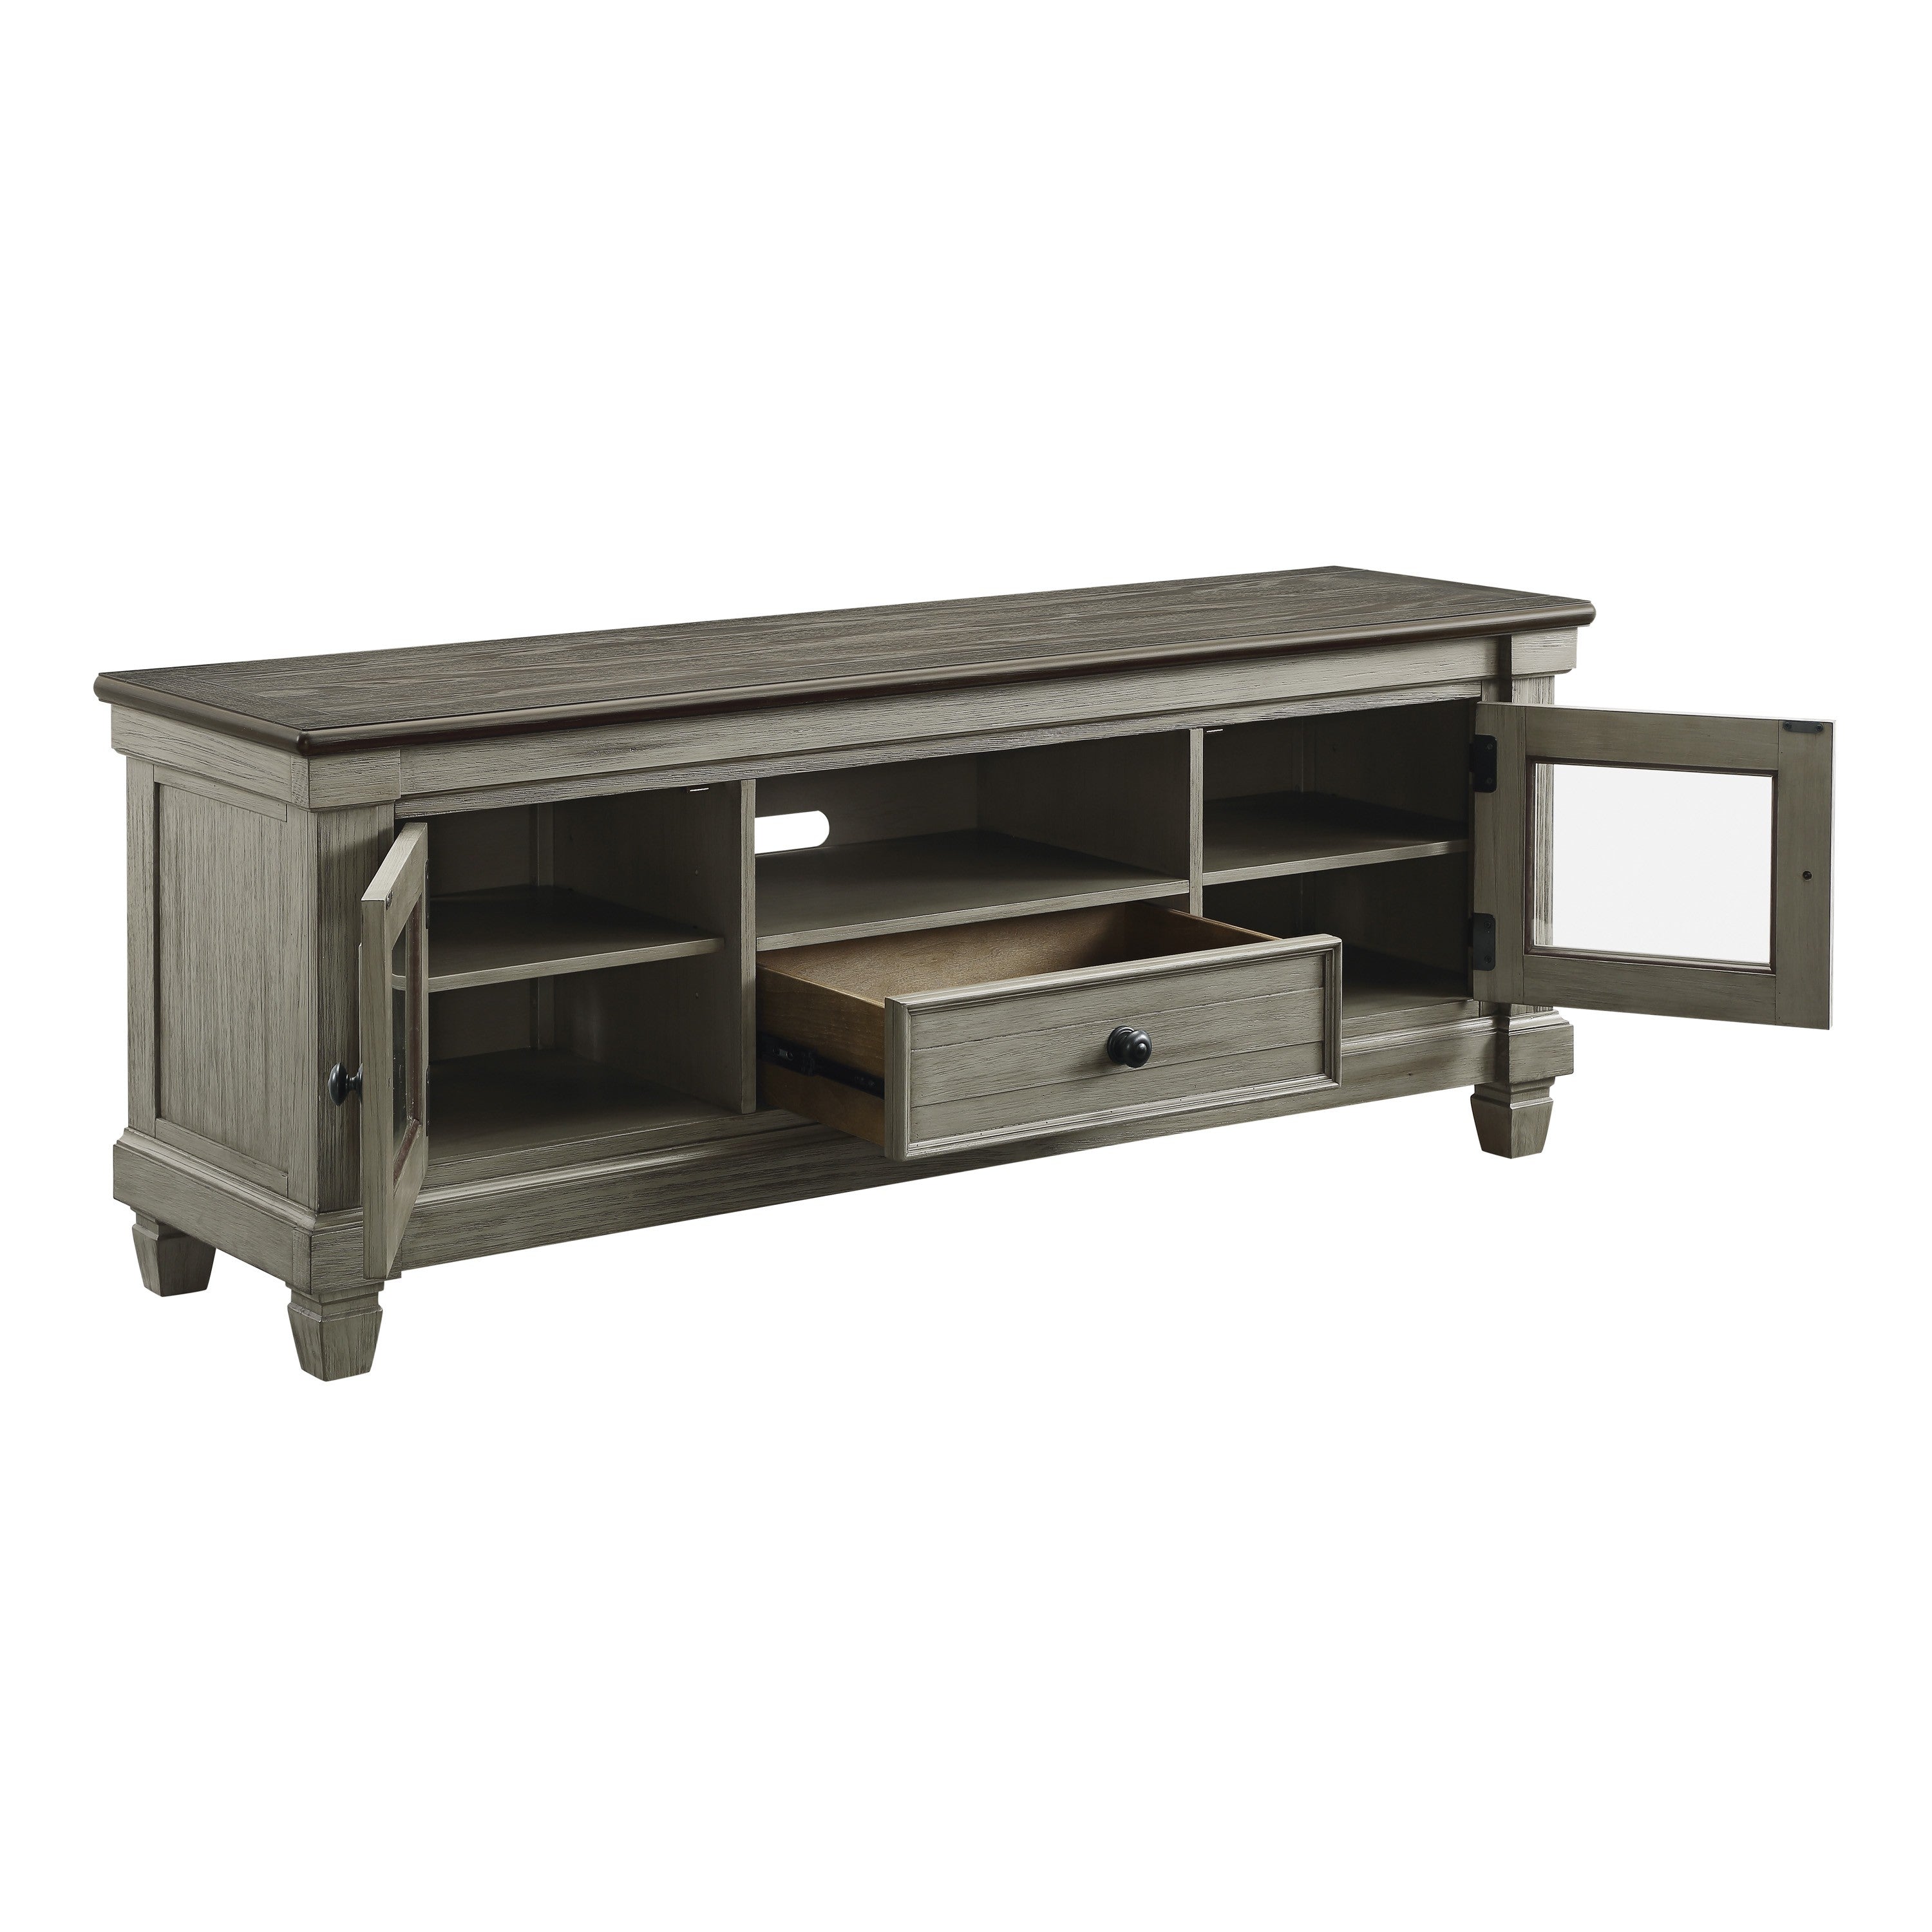 56270GY-64T TV Stand - 56270GY-64T - Bien Home Furniture &amp; Electronics